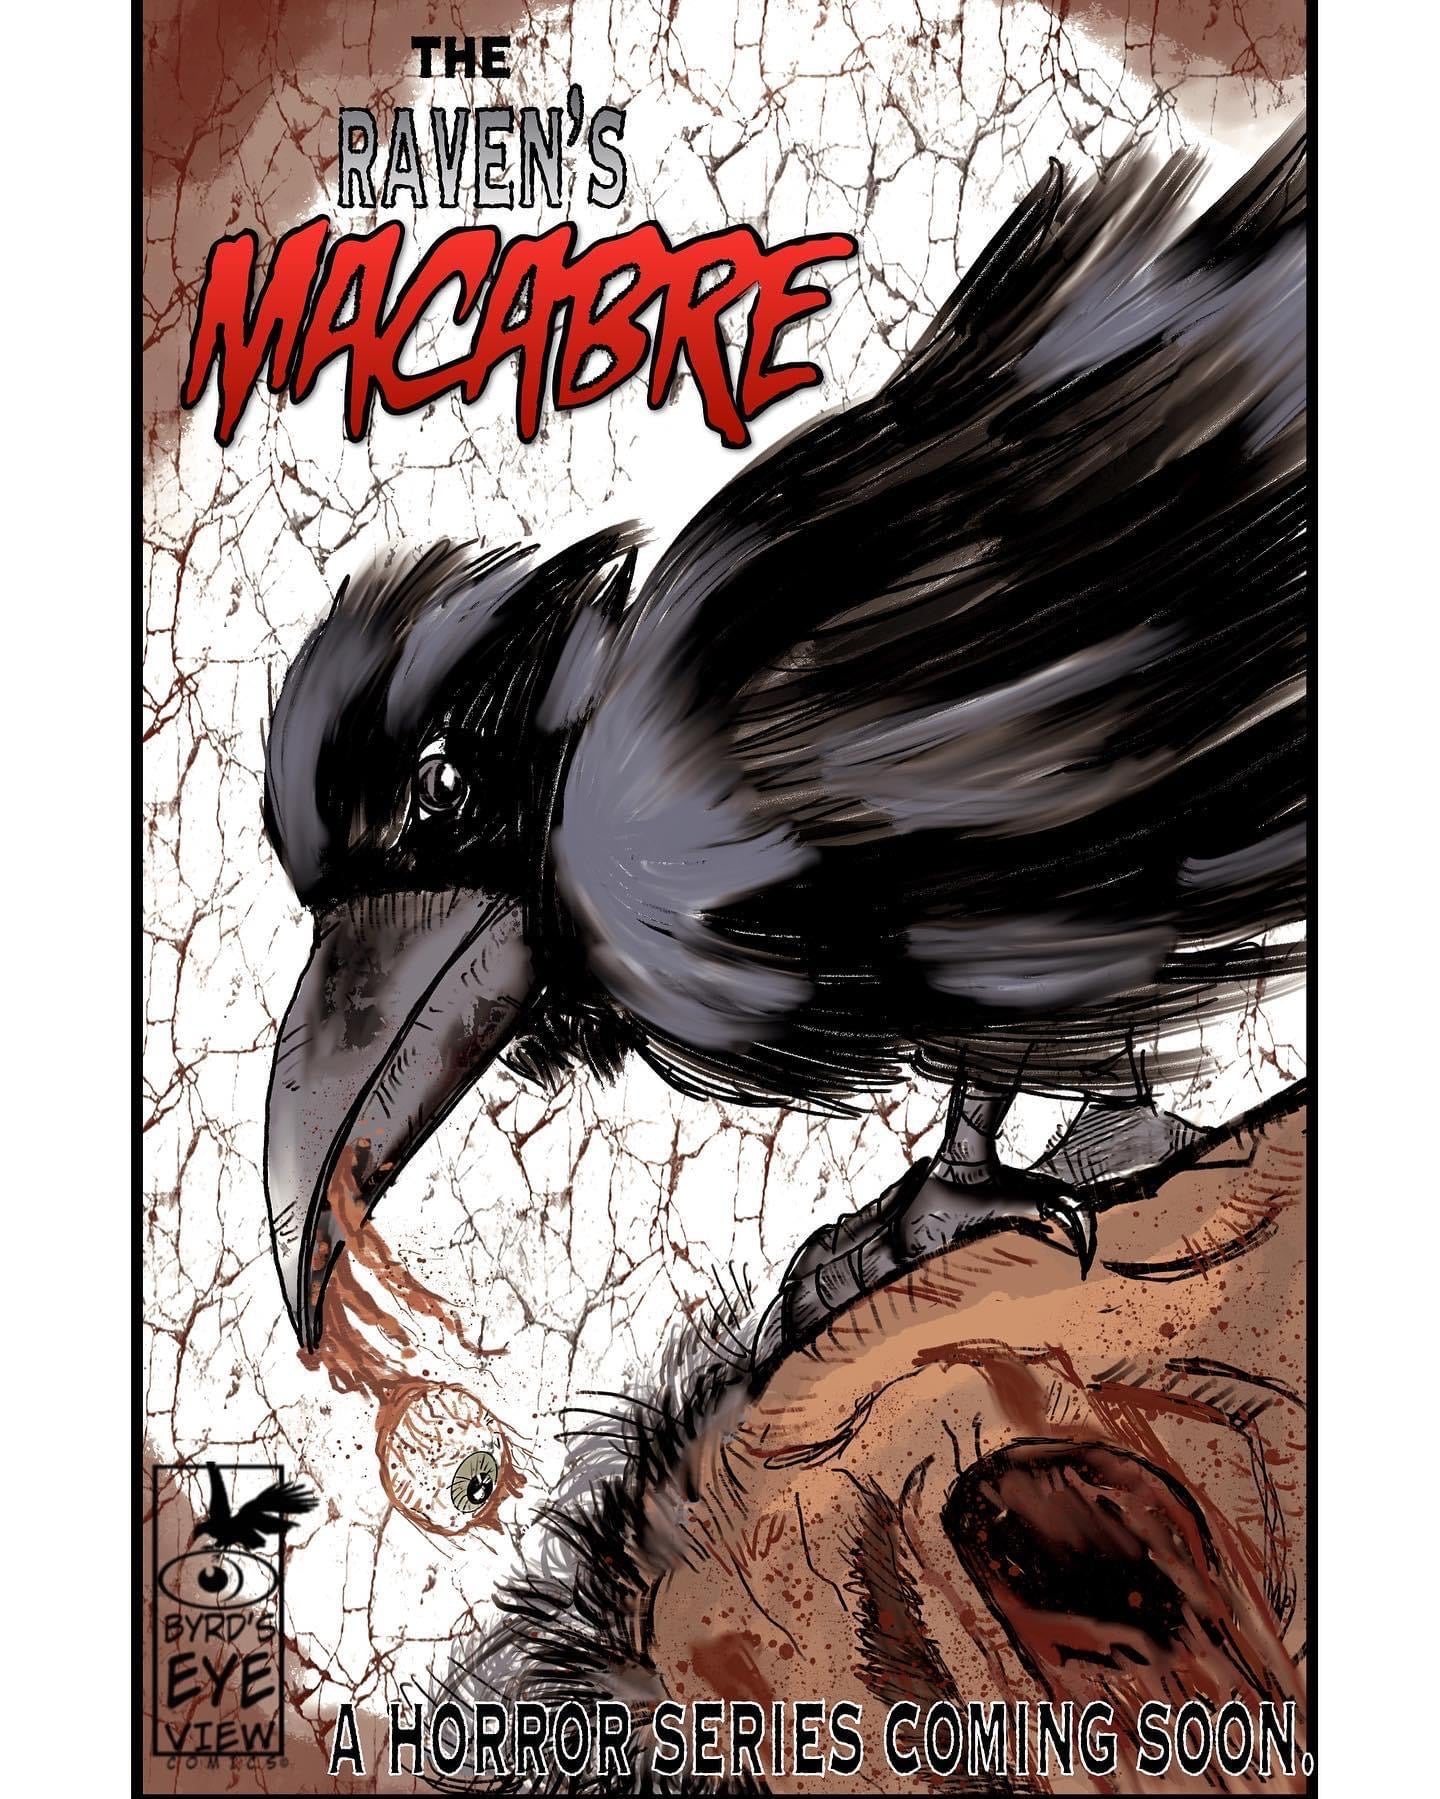 The Raven’s Macabre